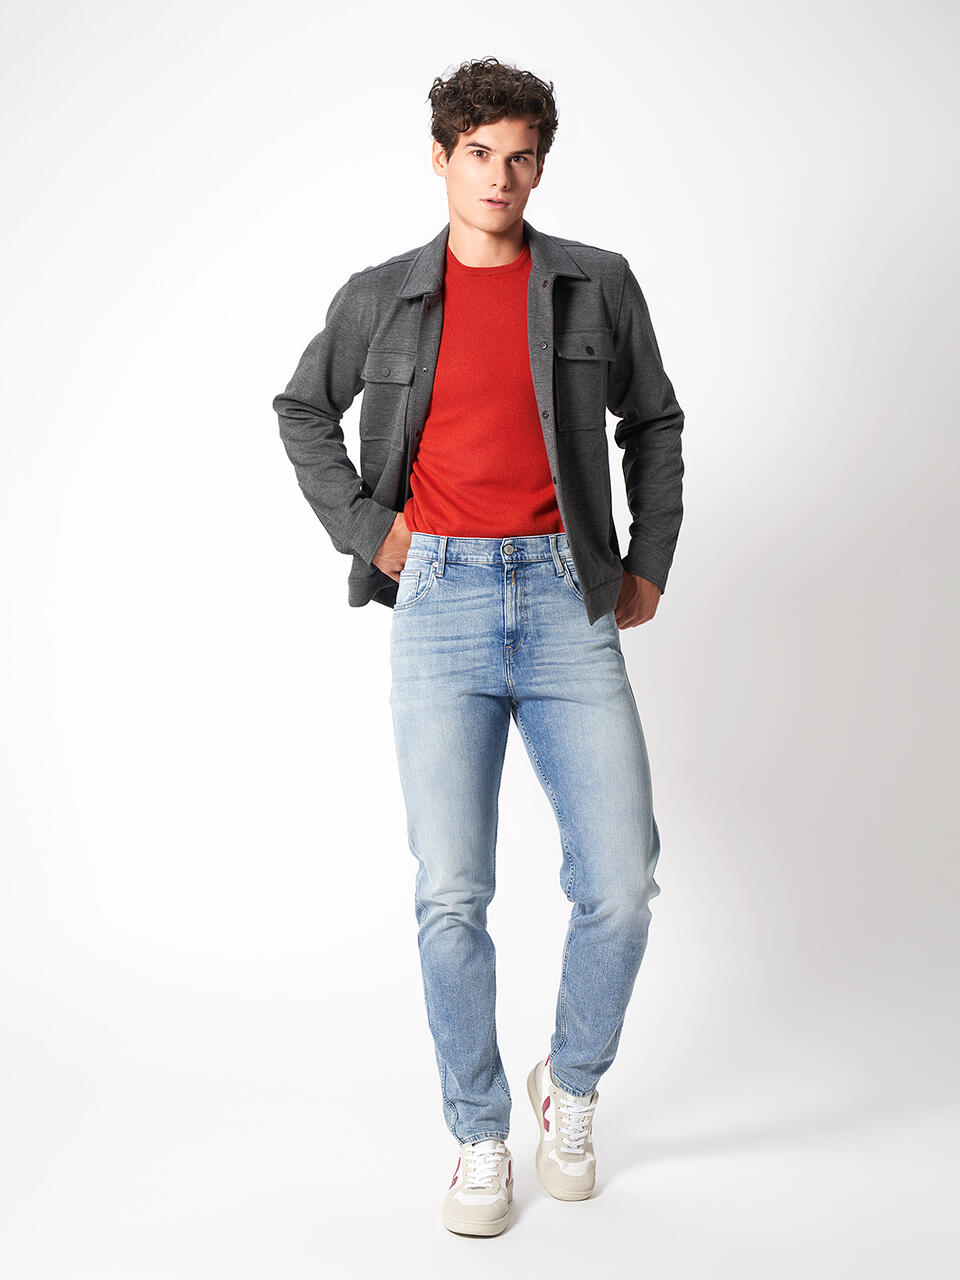 1 Jeans, 5 Looks - Tapered